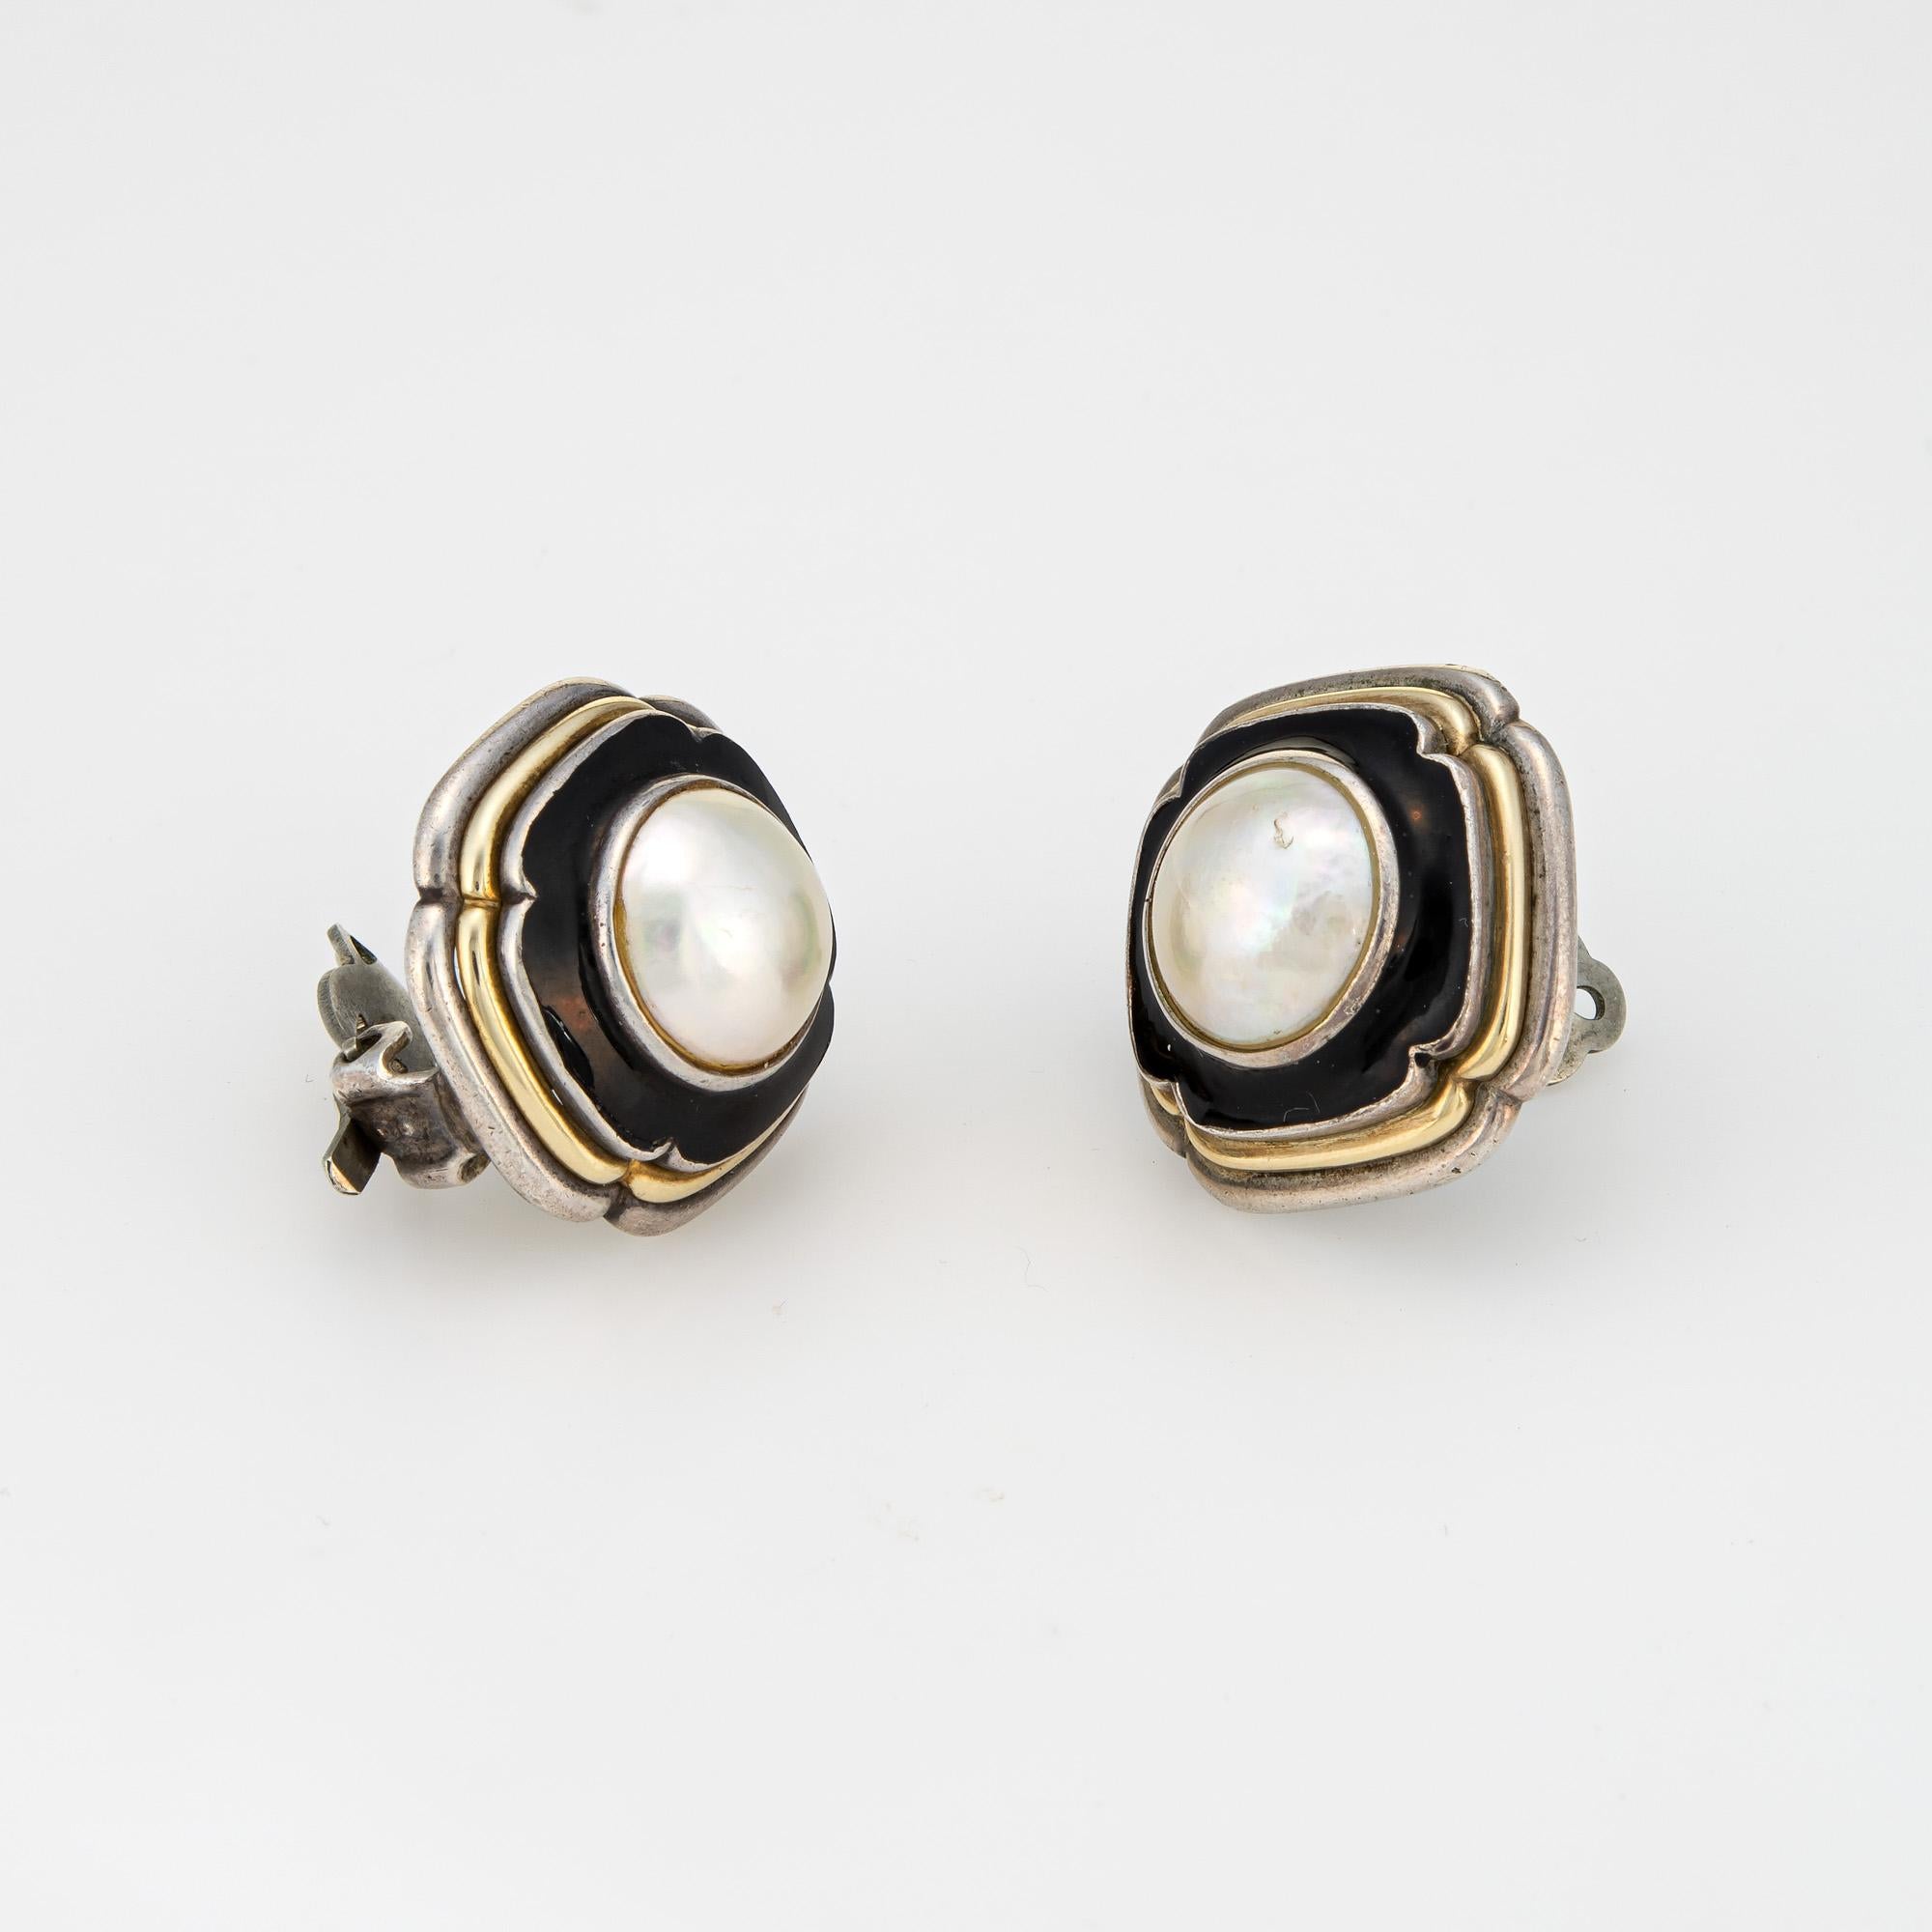 Stylish vintage Cartier Mabe pearl earrings crafted in sterling silver and 18 karat yellow gold (circa 1970s).  

Two 10mm Mabe pearls are set into the earrings. The pearls exhibit a glossy luster with rose & green overtones. The pearls are framed